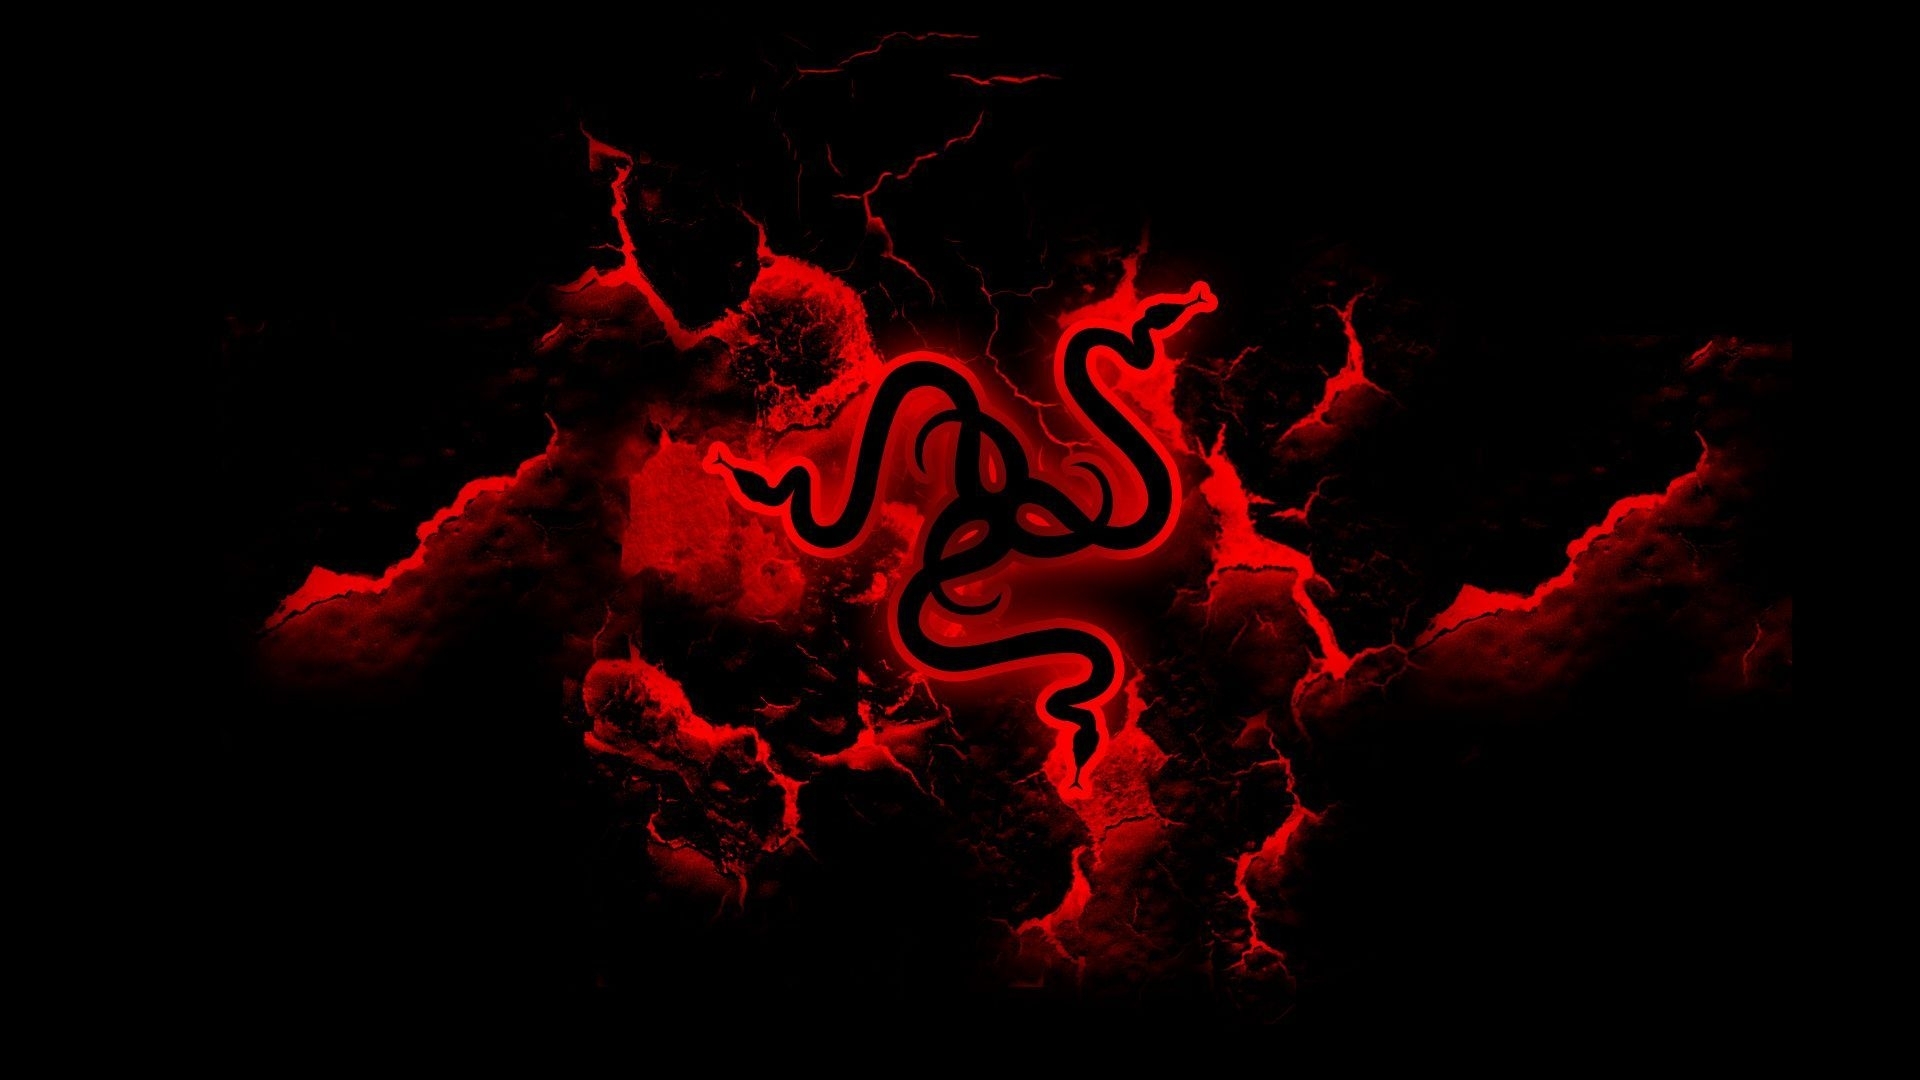 10 New 1920x1080 Red And Black Wallpaper Full Hd 1080p For Pc